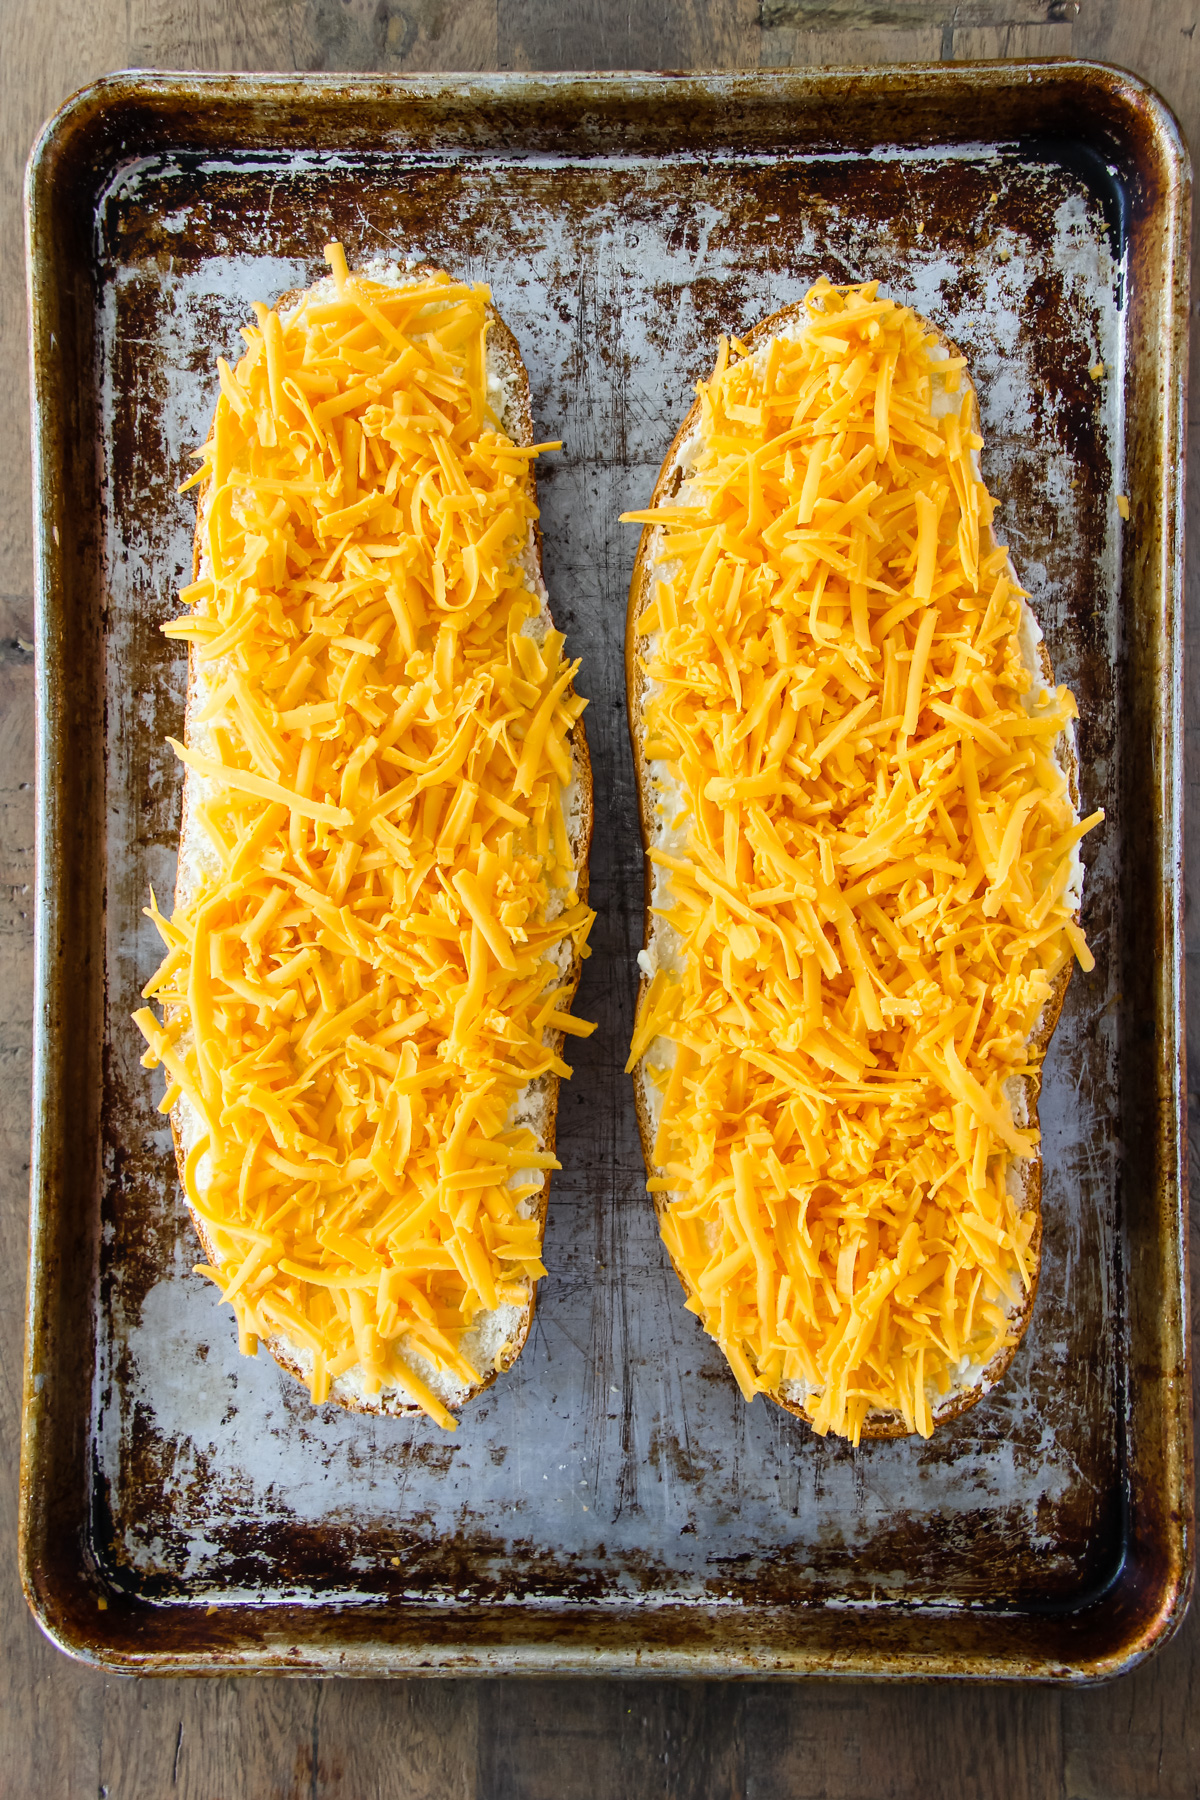 two halves of French bread covered in shredded cheddar cheese are placed on a baking sheet